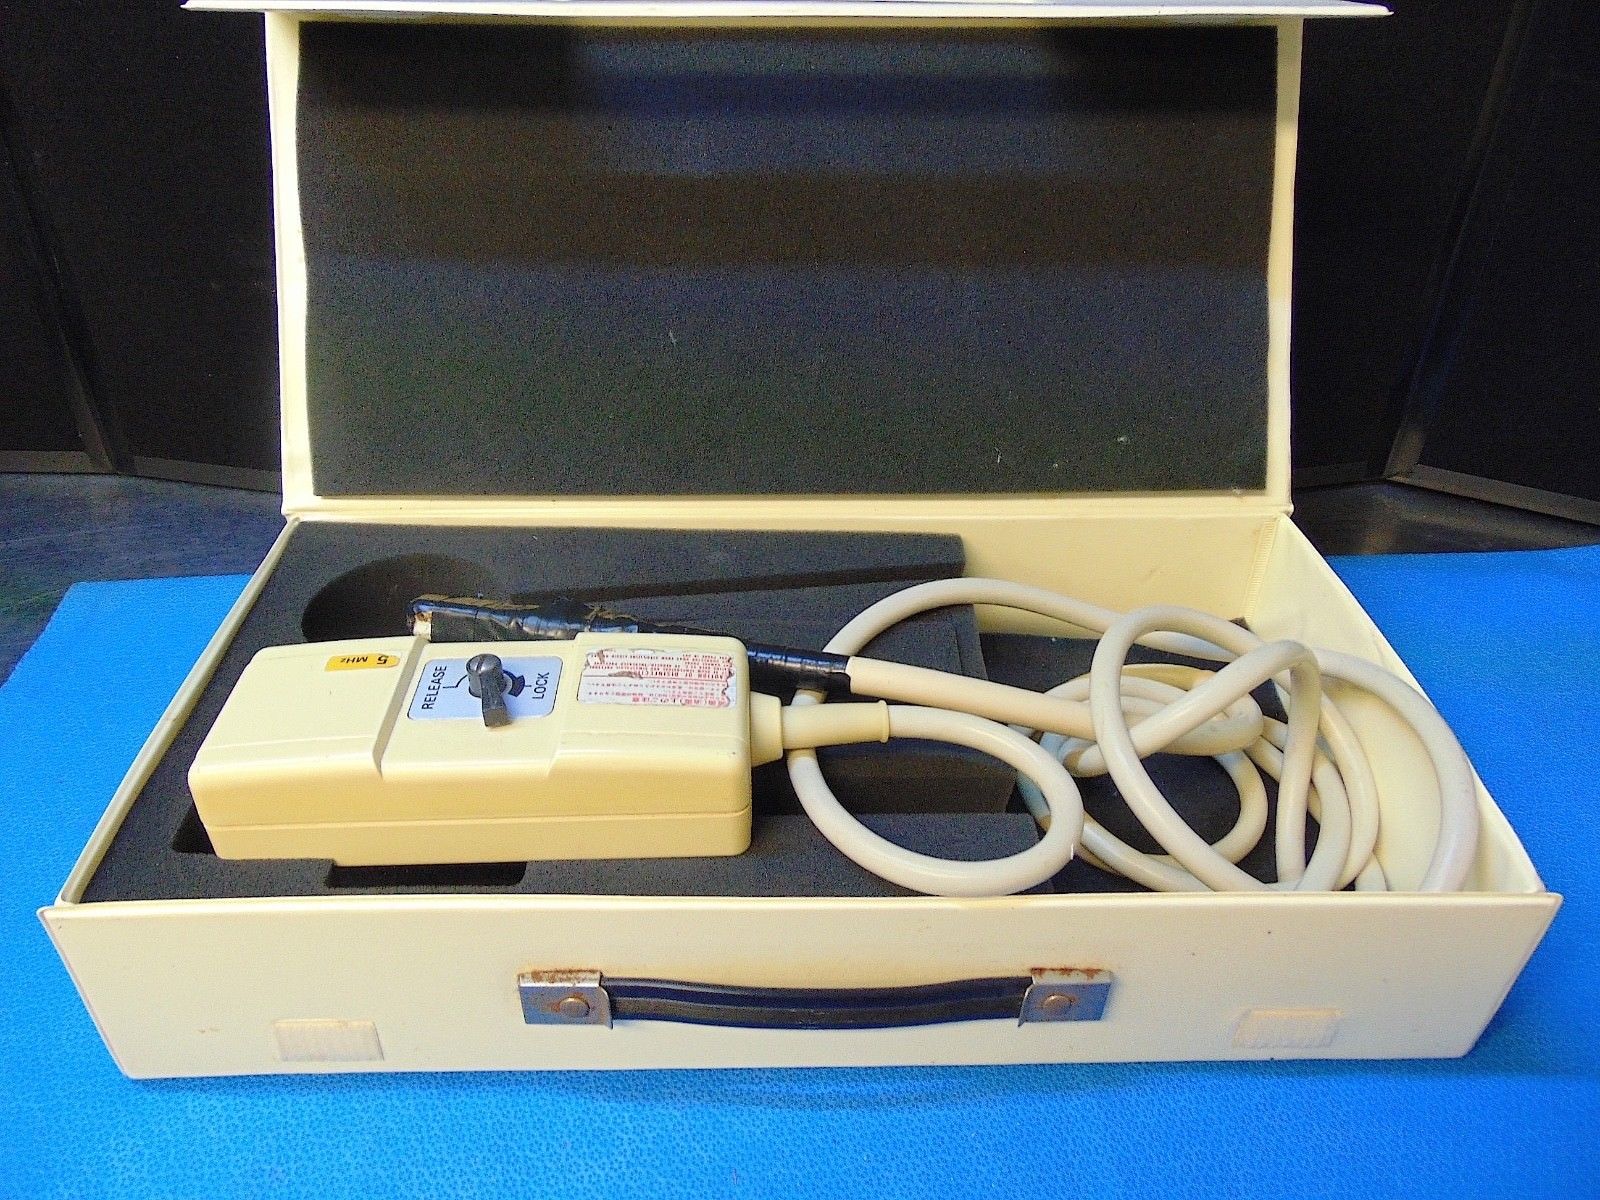 Aloka UST-5813-5 Ultrasound Probe 5 MHz Carry Case Included RH244 DIAGNOSTIC ULTRASOUND MACHINES FOR SALE